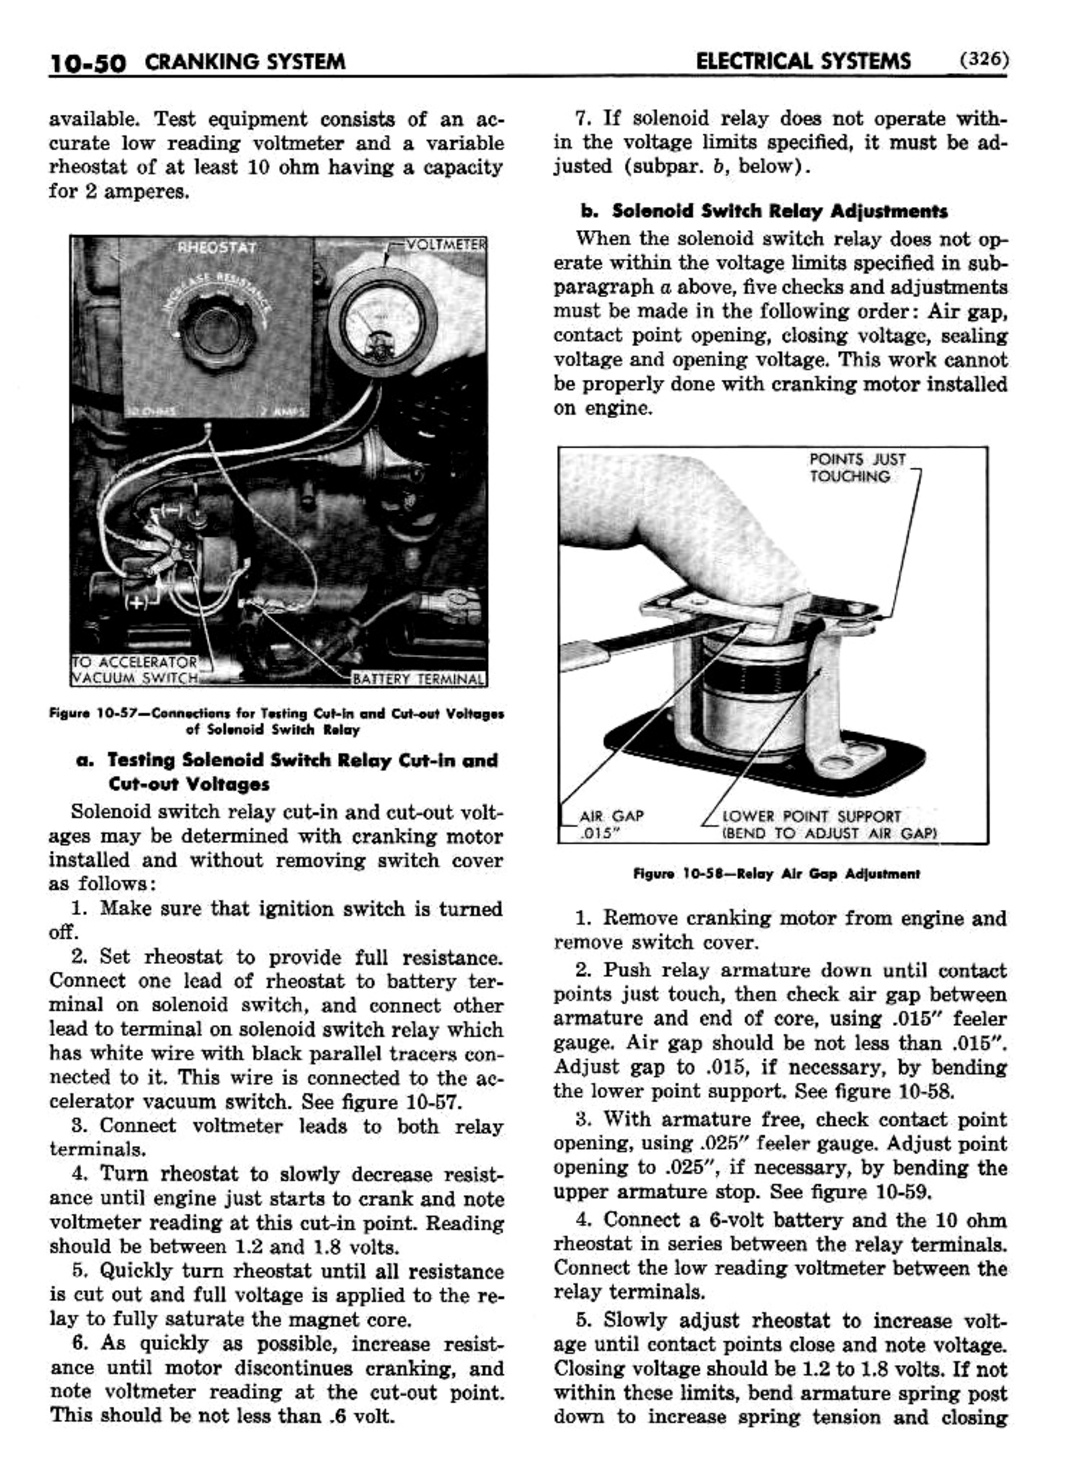 n_11 1948 Buick Shop Manual - Electrical Systems-050-050.jpg